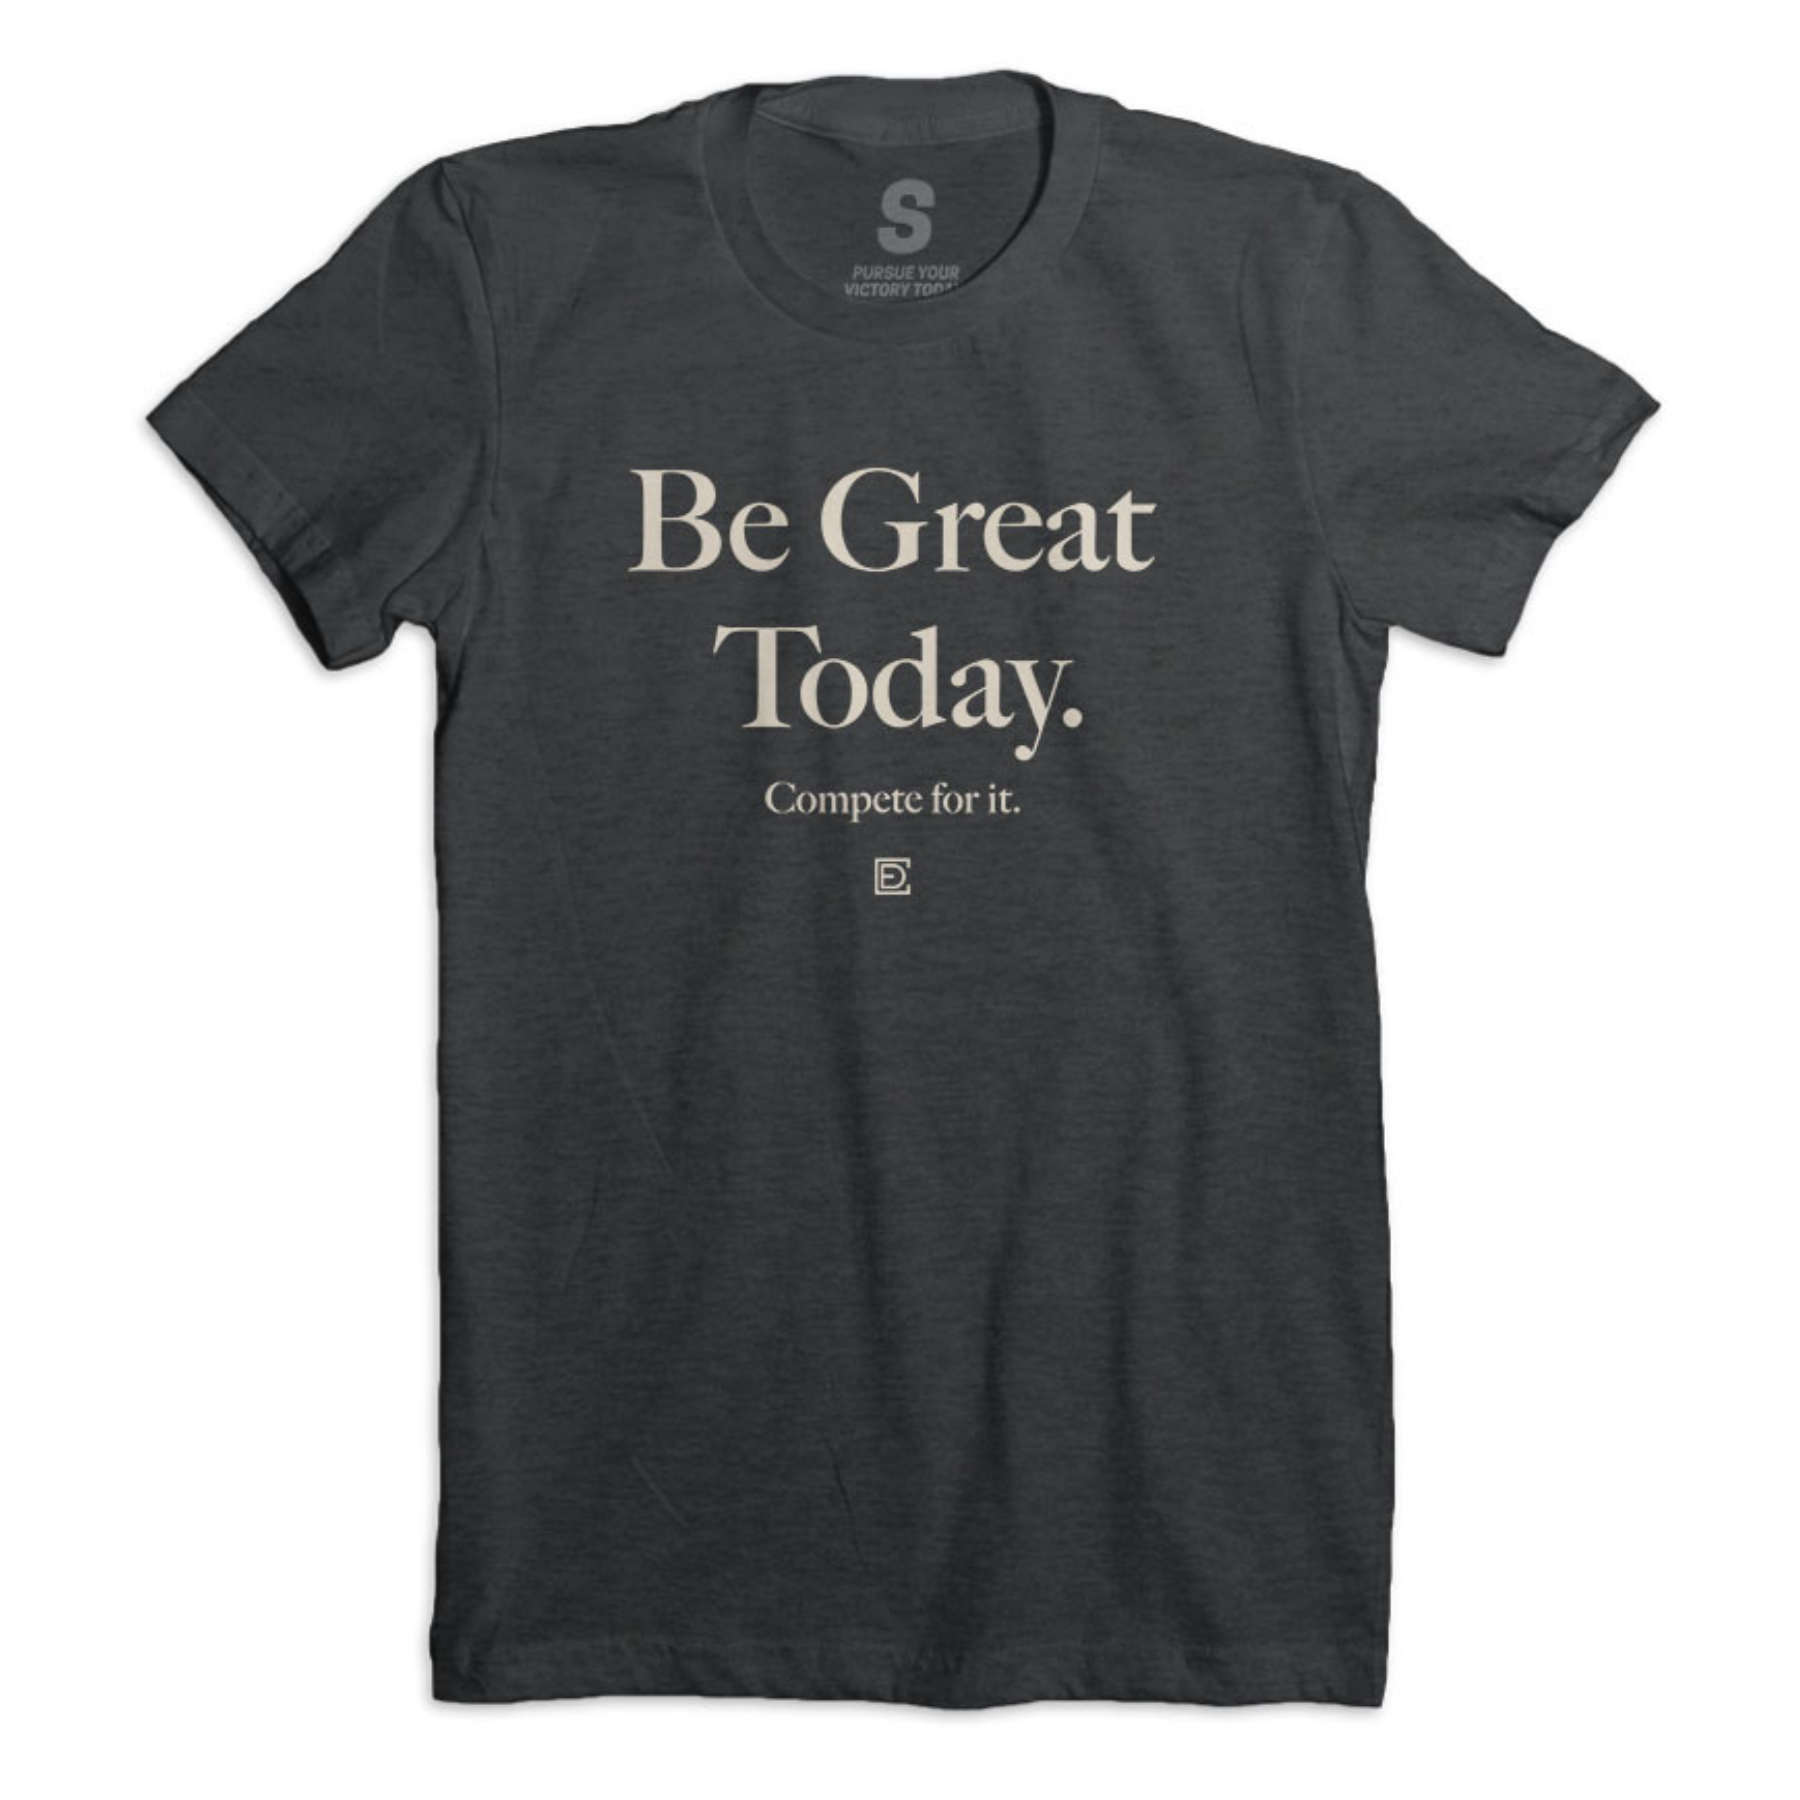 Be Great Today Women's Shirt